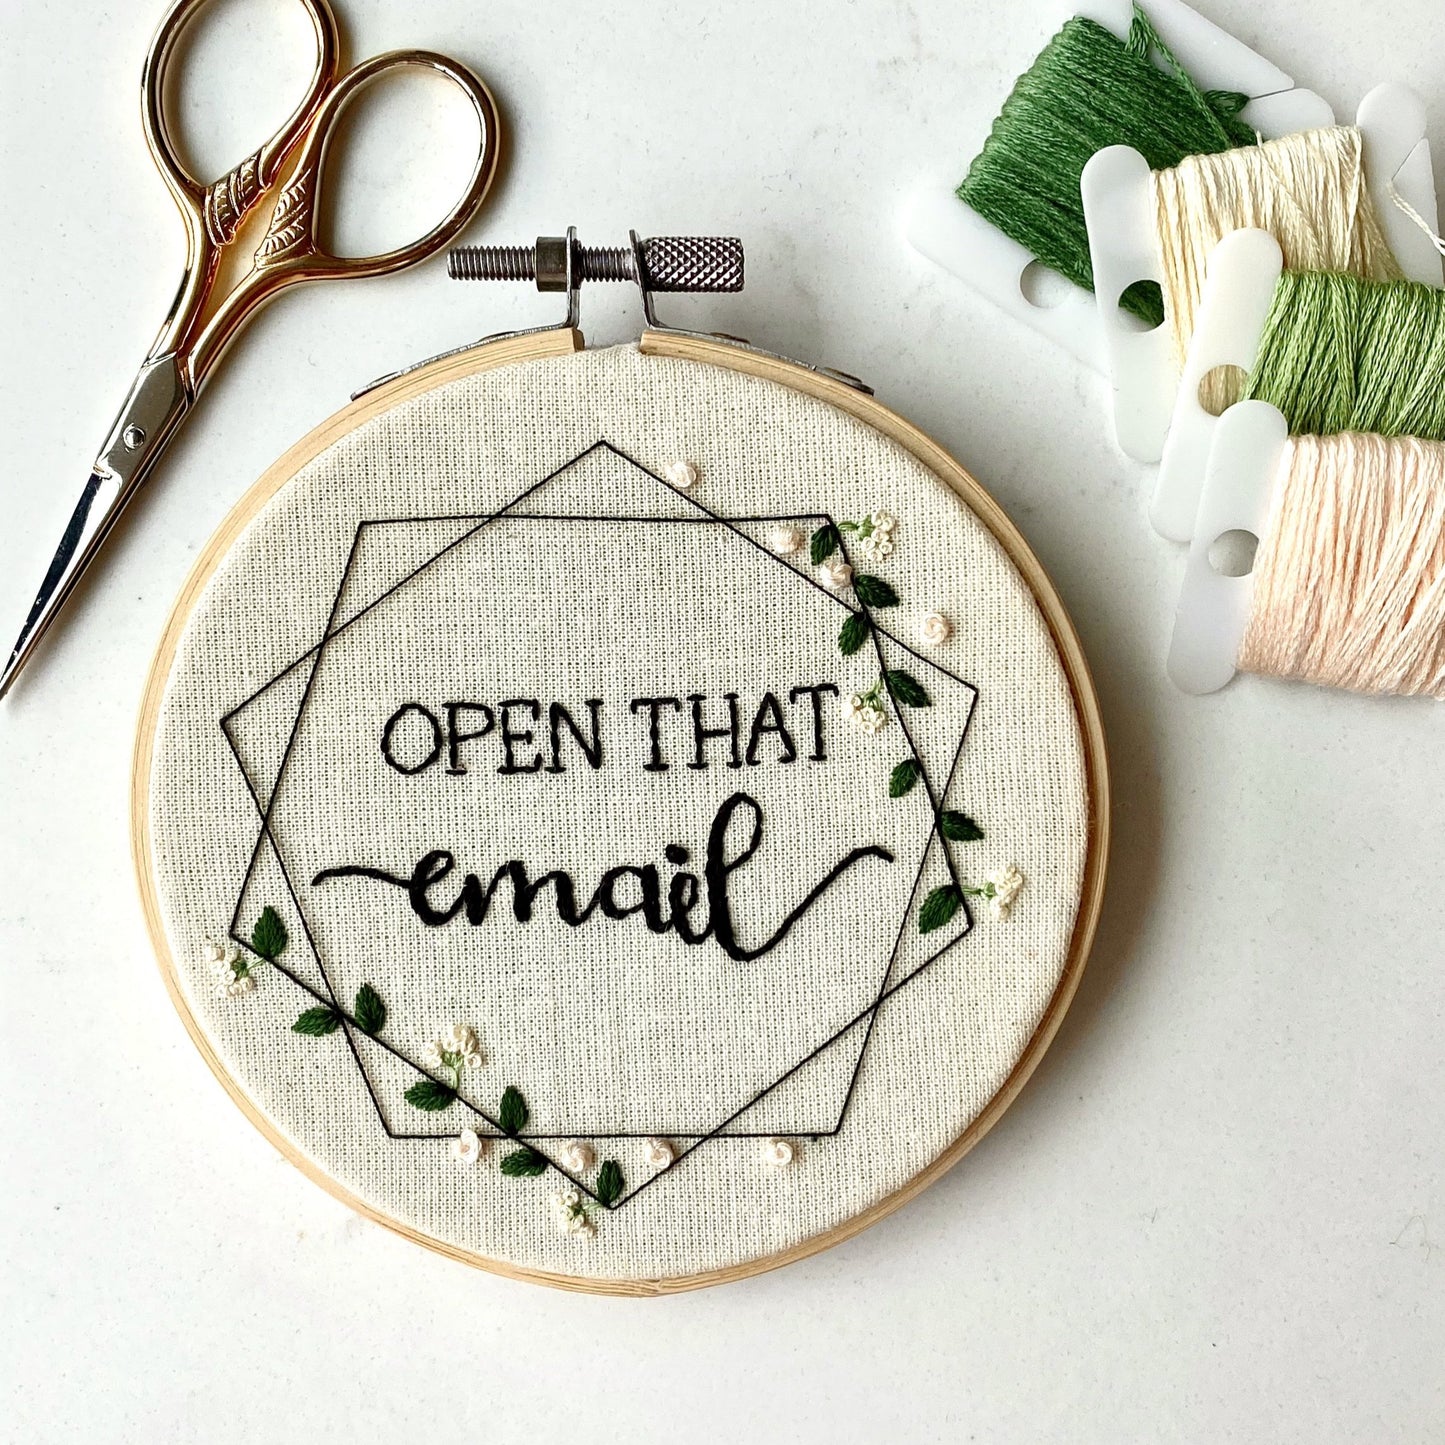 Geometric quote embroidery hoop